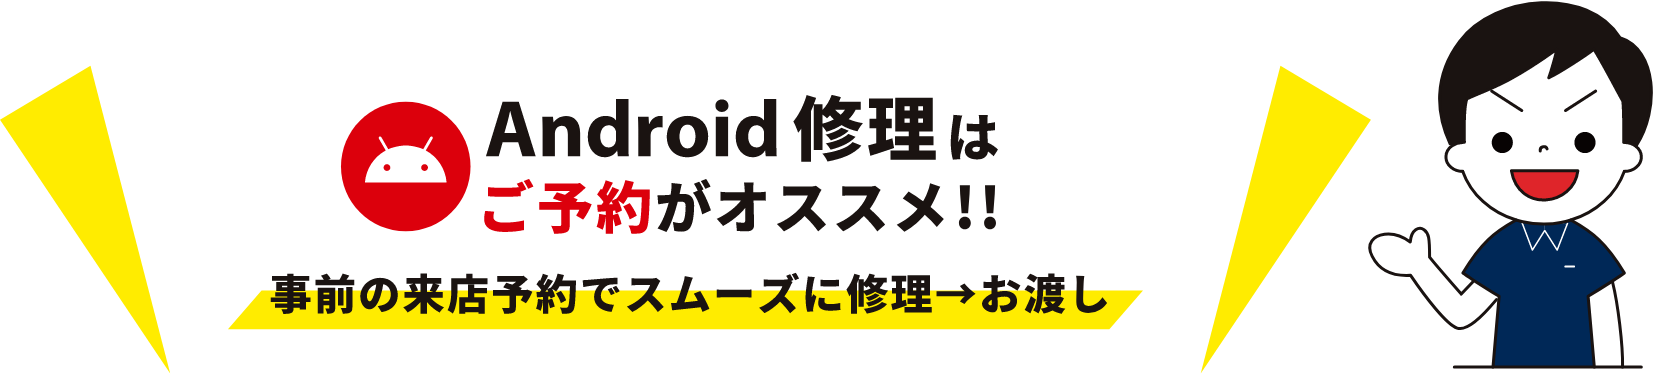 Android端末修理